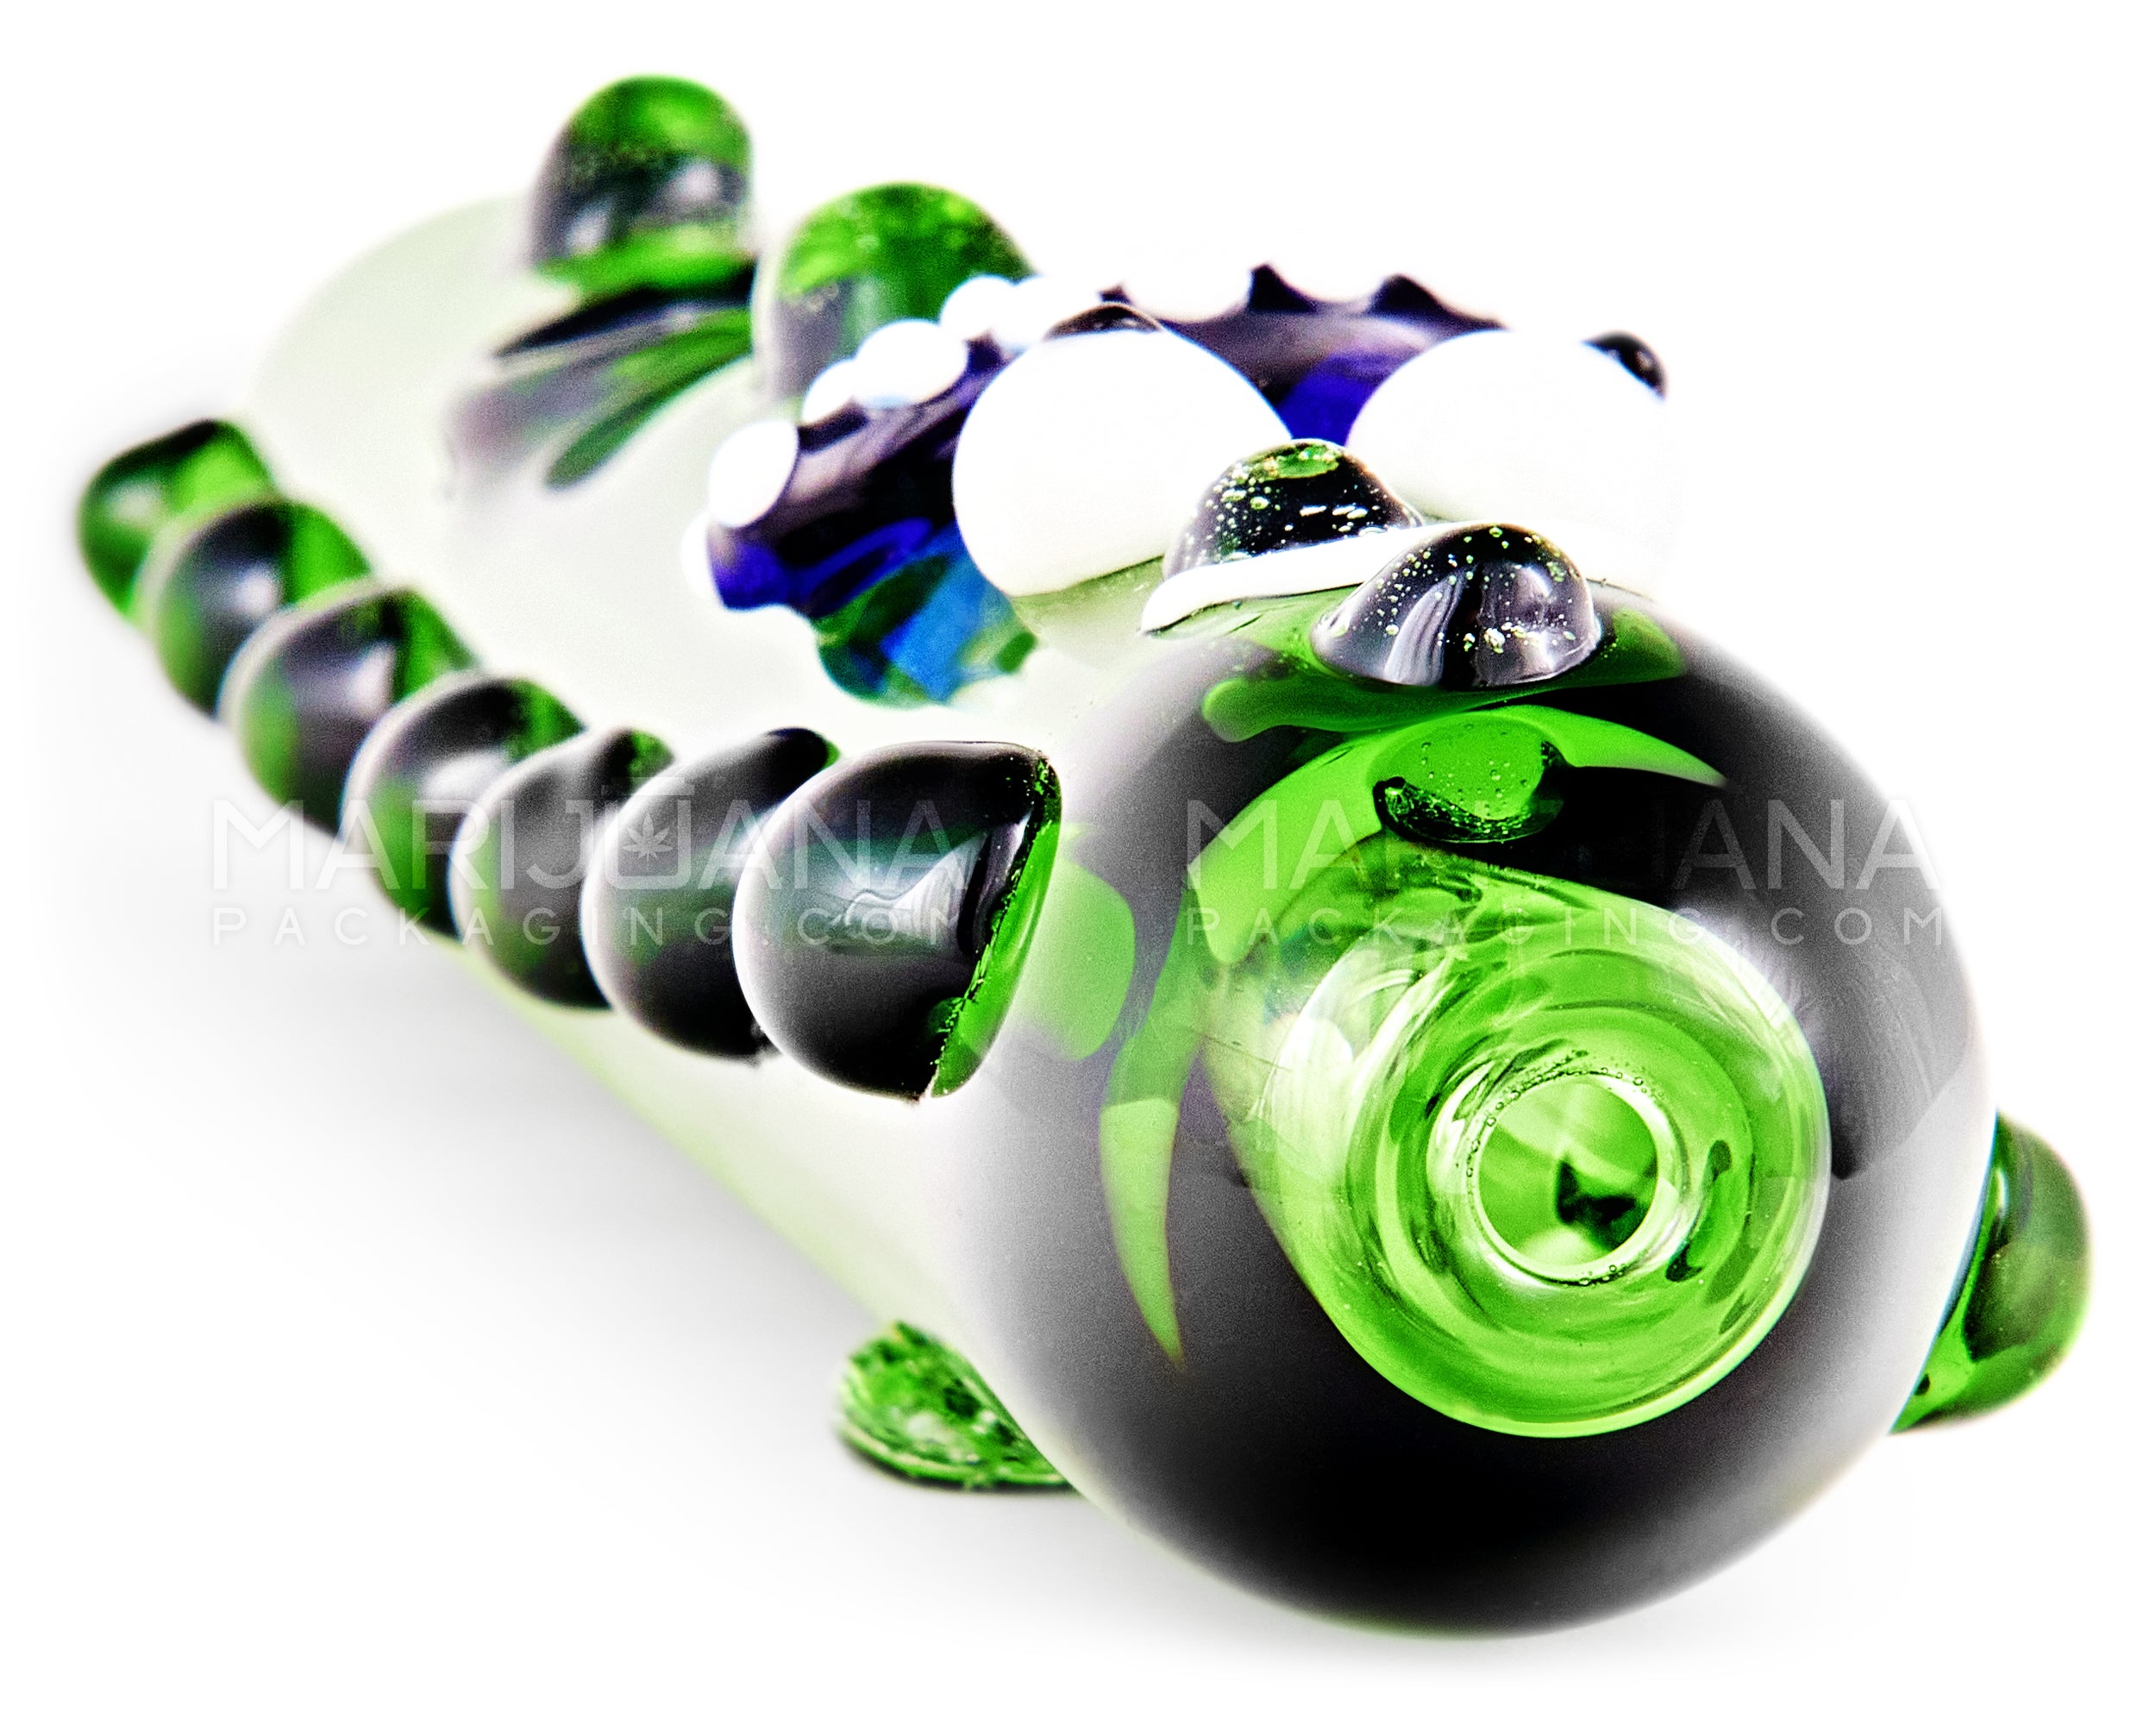 Pickle Rick Steamroller Hand Pipe w/ Multi Knockers | 5.5in Long - Glass - Green - 5